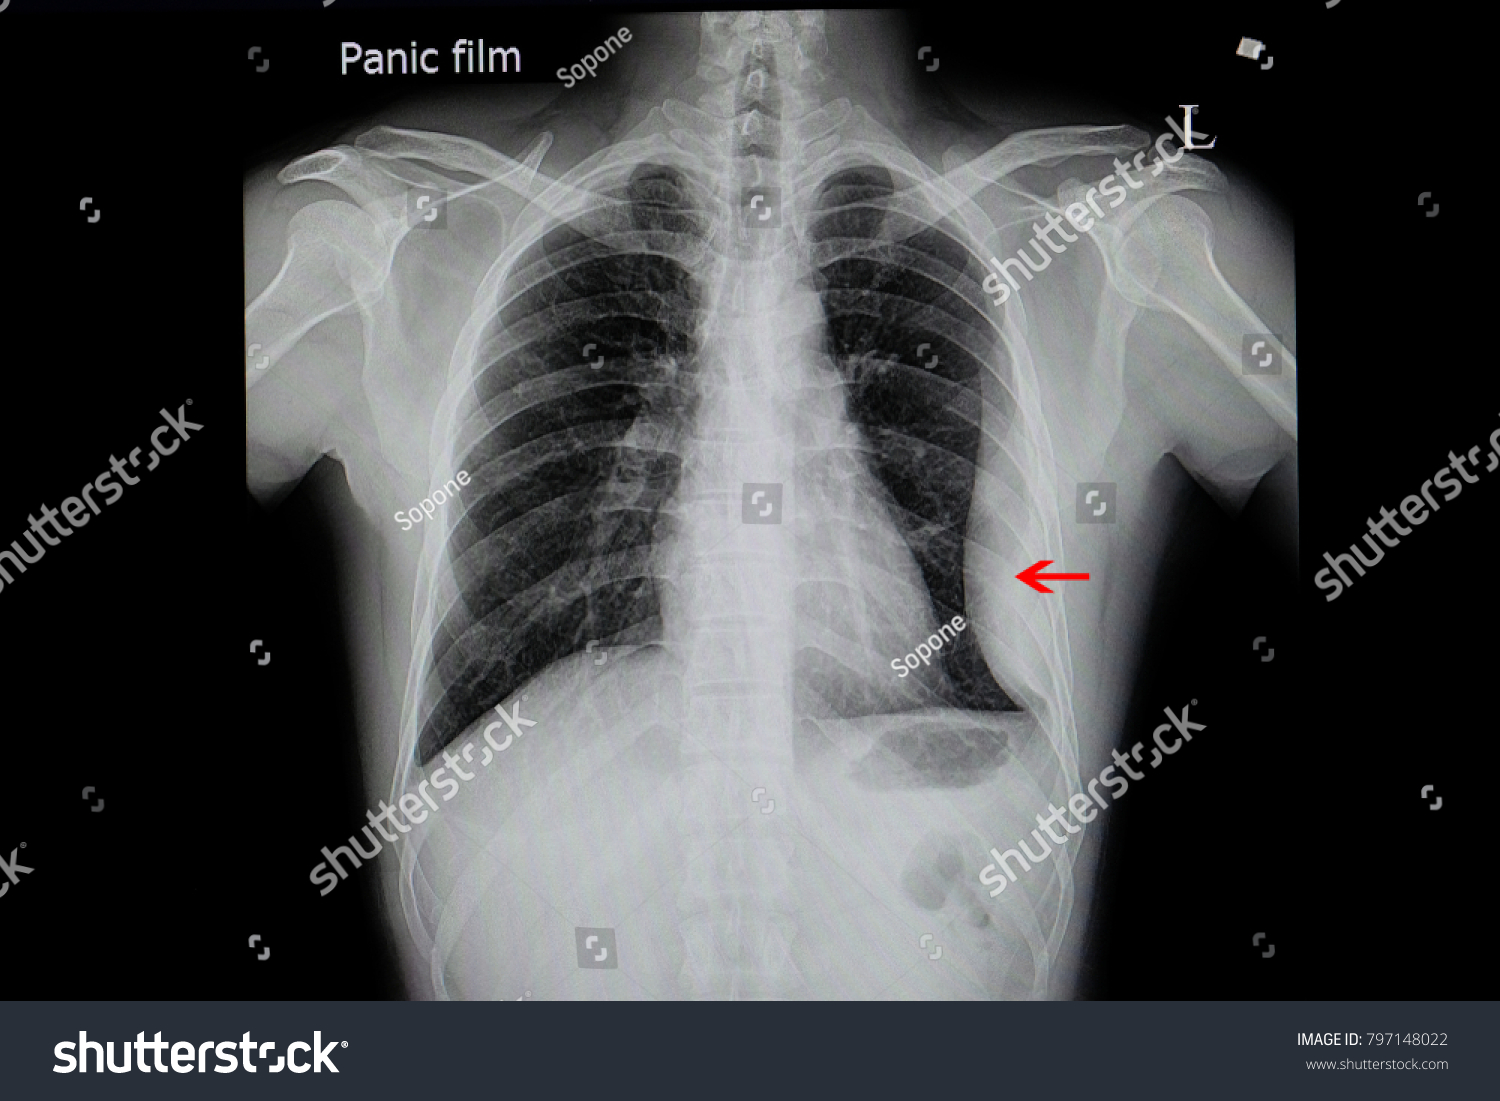 Chest Xray Film Patient Loculated Pleural Stock Photo Edit Now 797148022